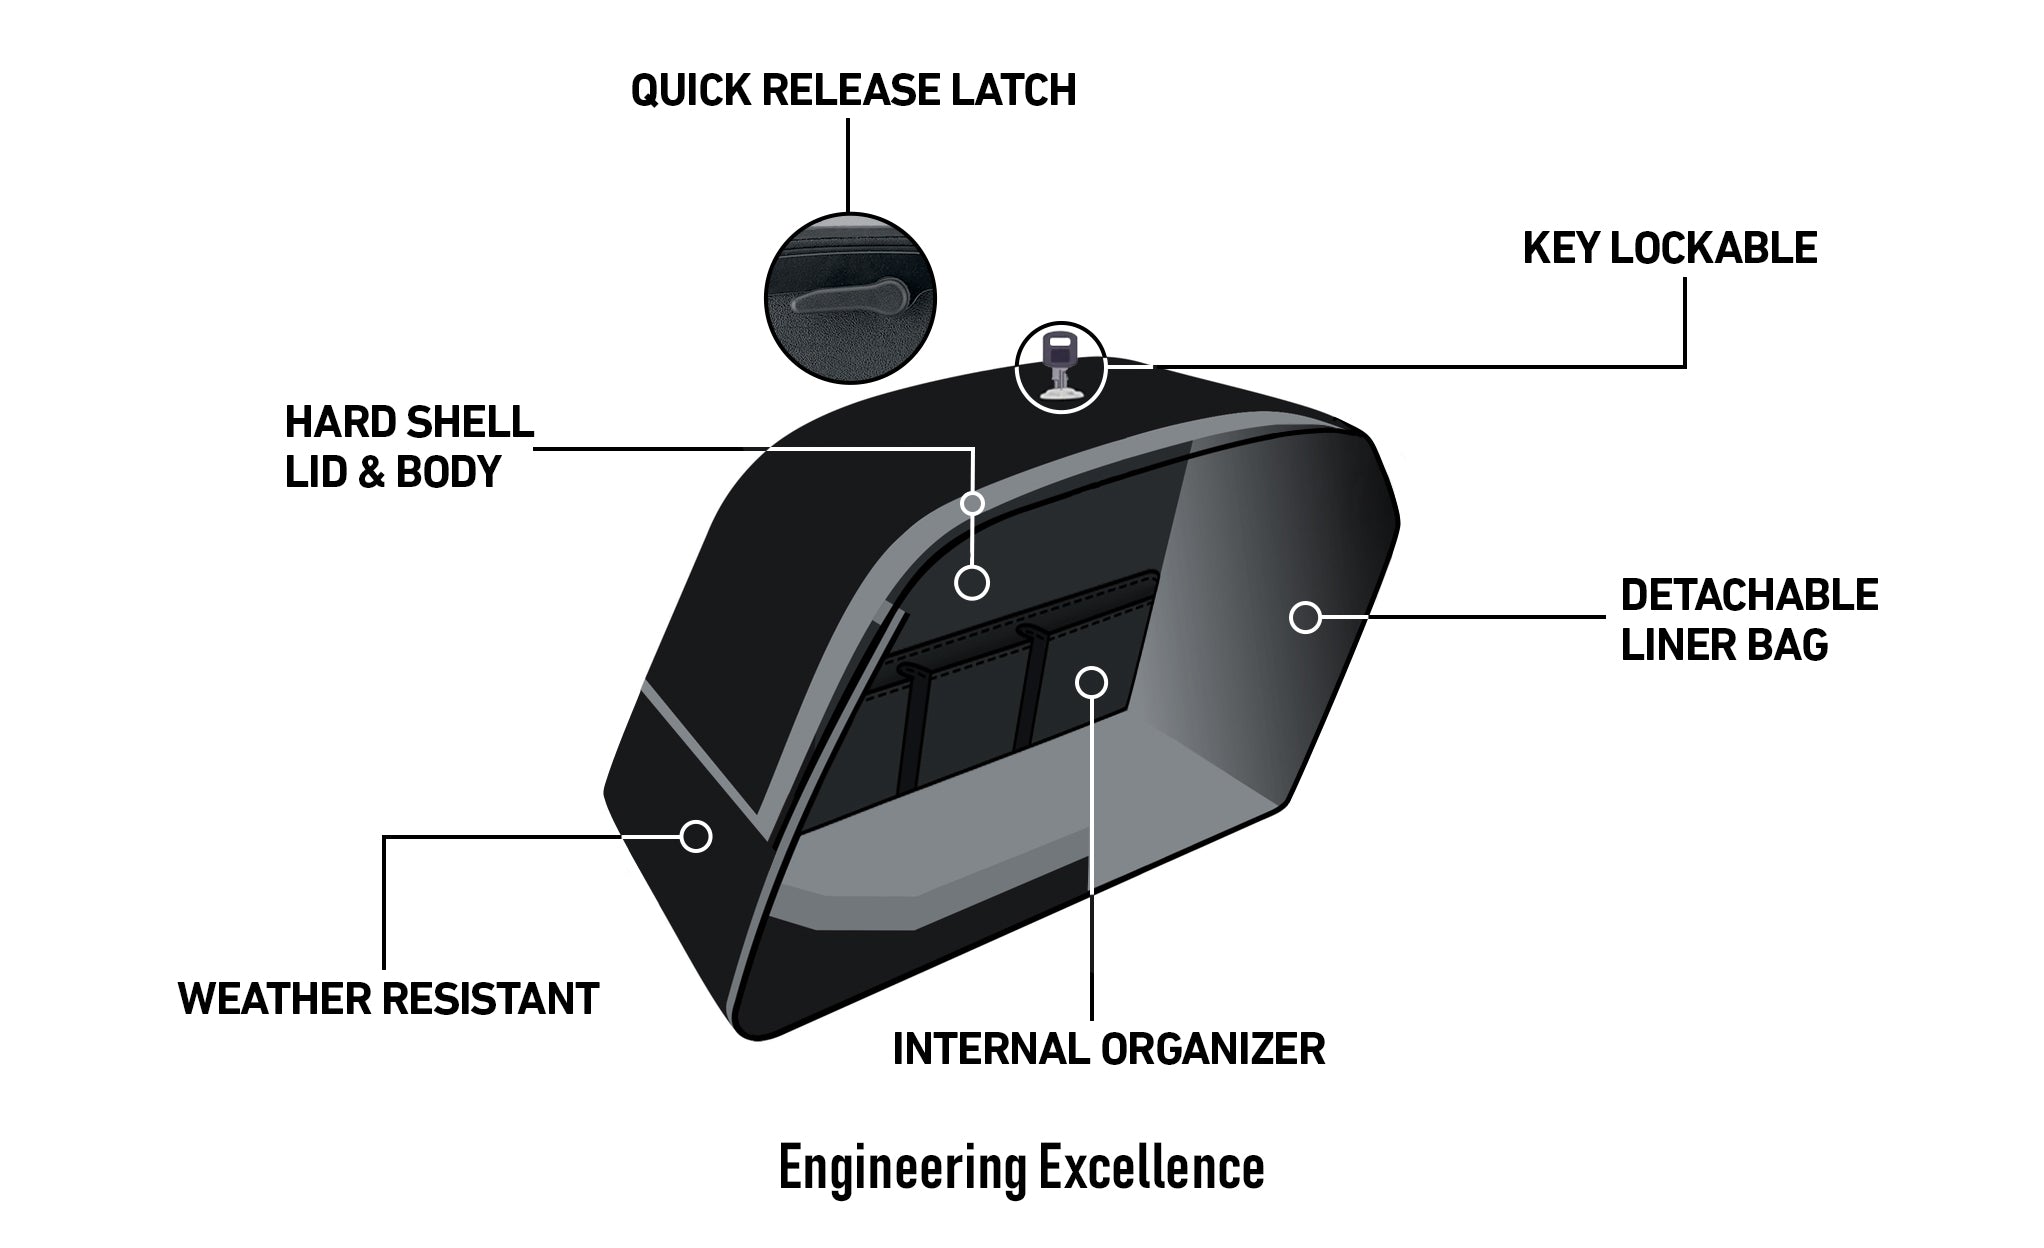 Viking Baldur Extra Large Matte Motorcycle Hard Saddlebags For Harley Softail Breakout 114 Fxbr S Engineering Excellence with Bag on Bike @expand